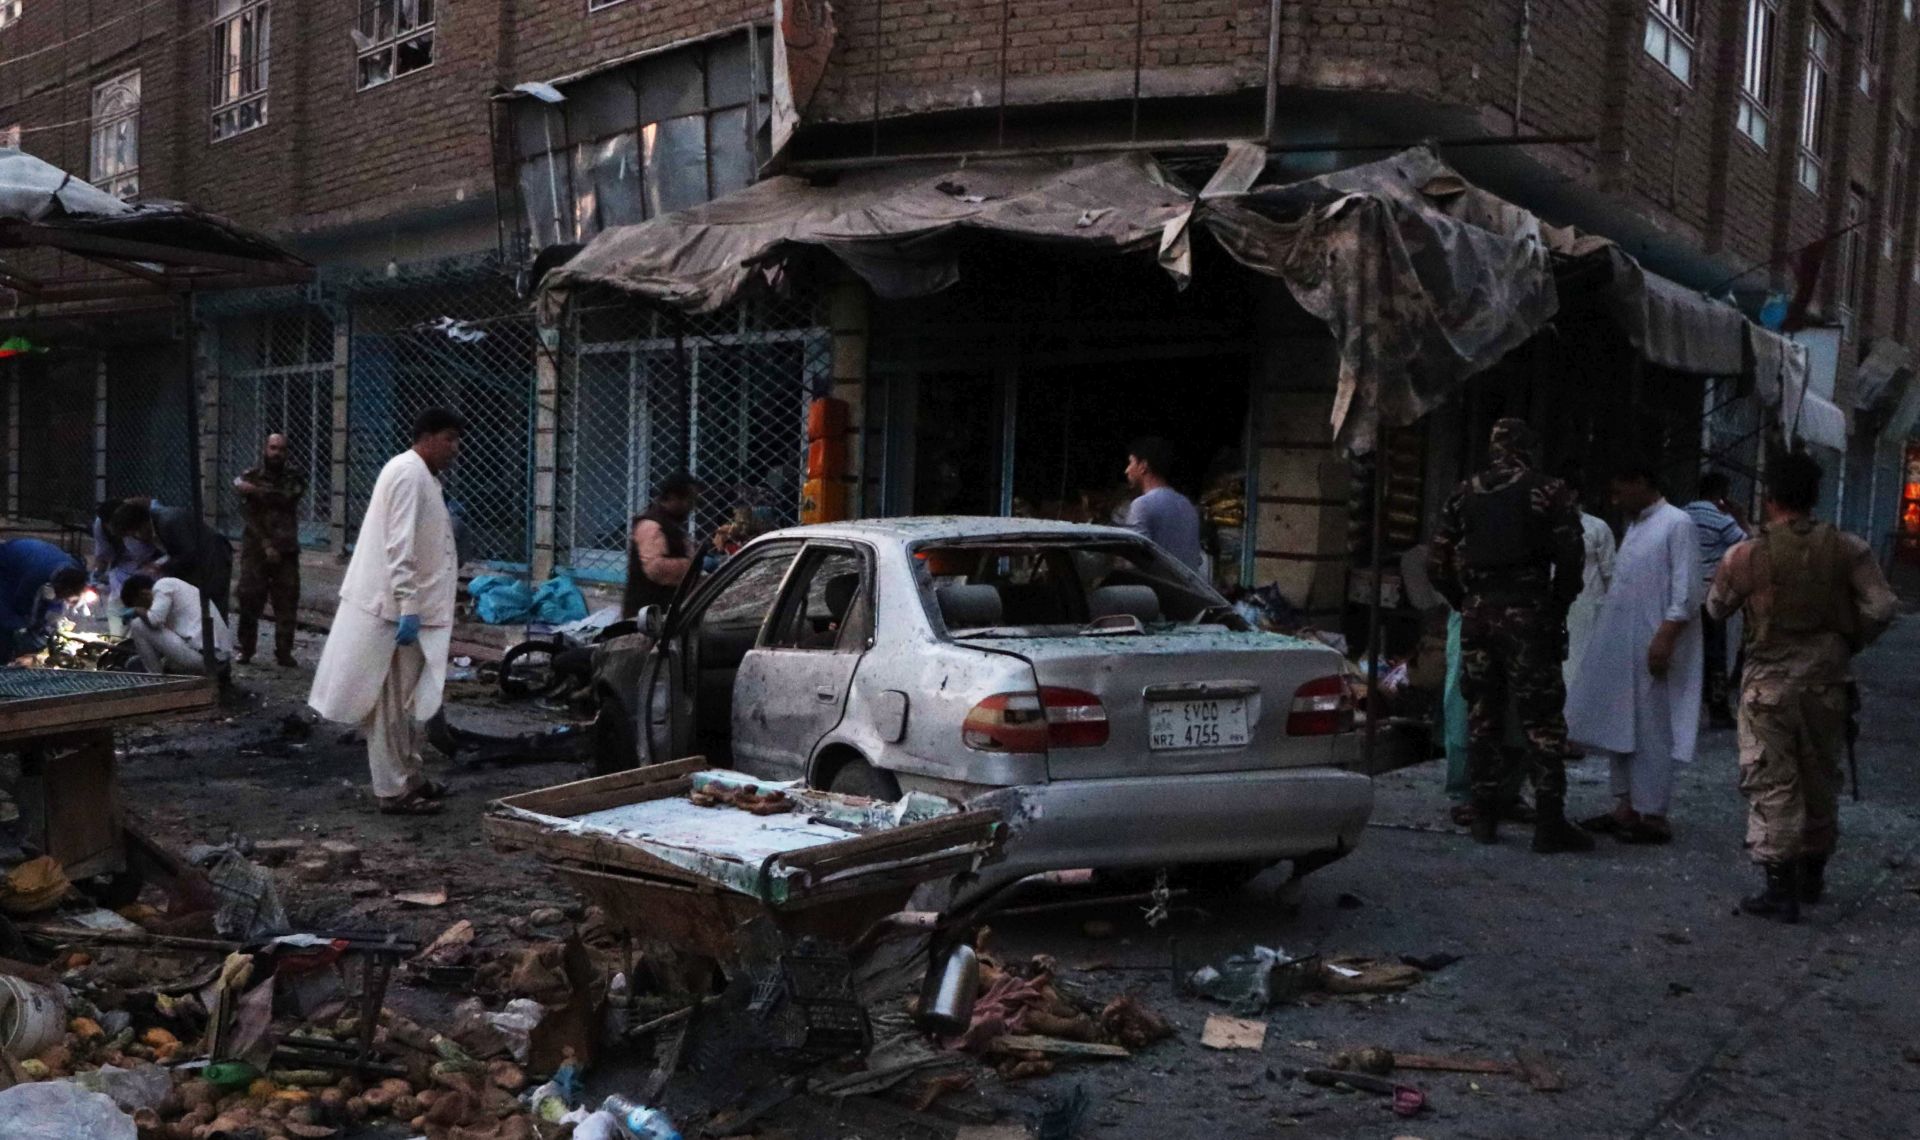 epa07758248 Afghan security officials inspect the scene of a bomb blast in Herat, Afghanistan, 05 August 2019. At least four people were killed and 25 others injured when a bomb exploded in Herat.  EPA/JALIL REZAYEE